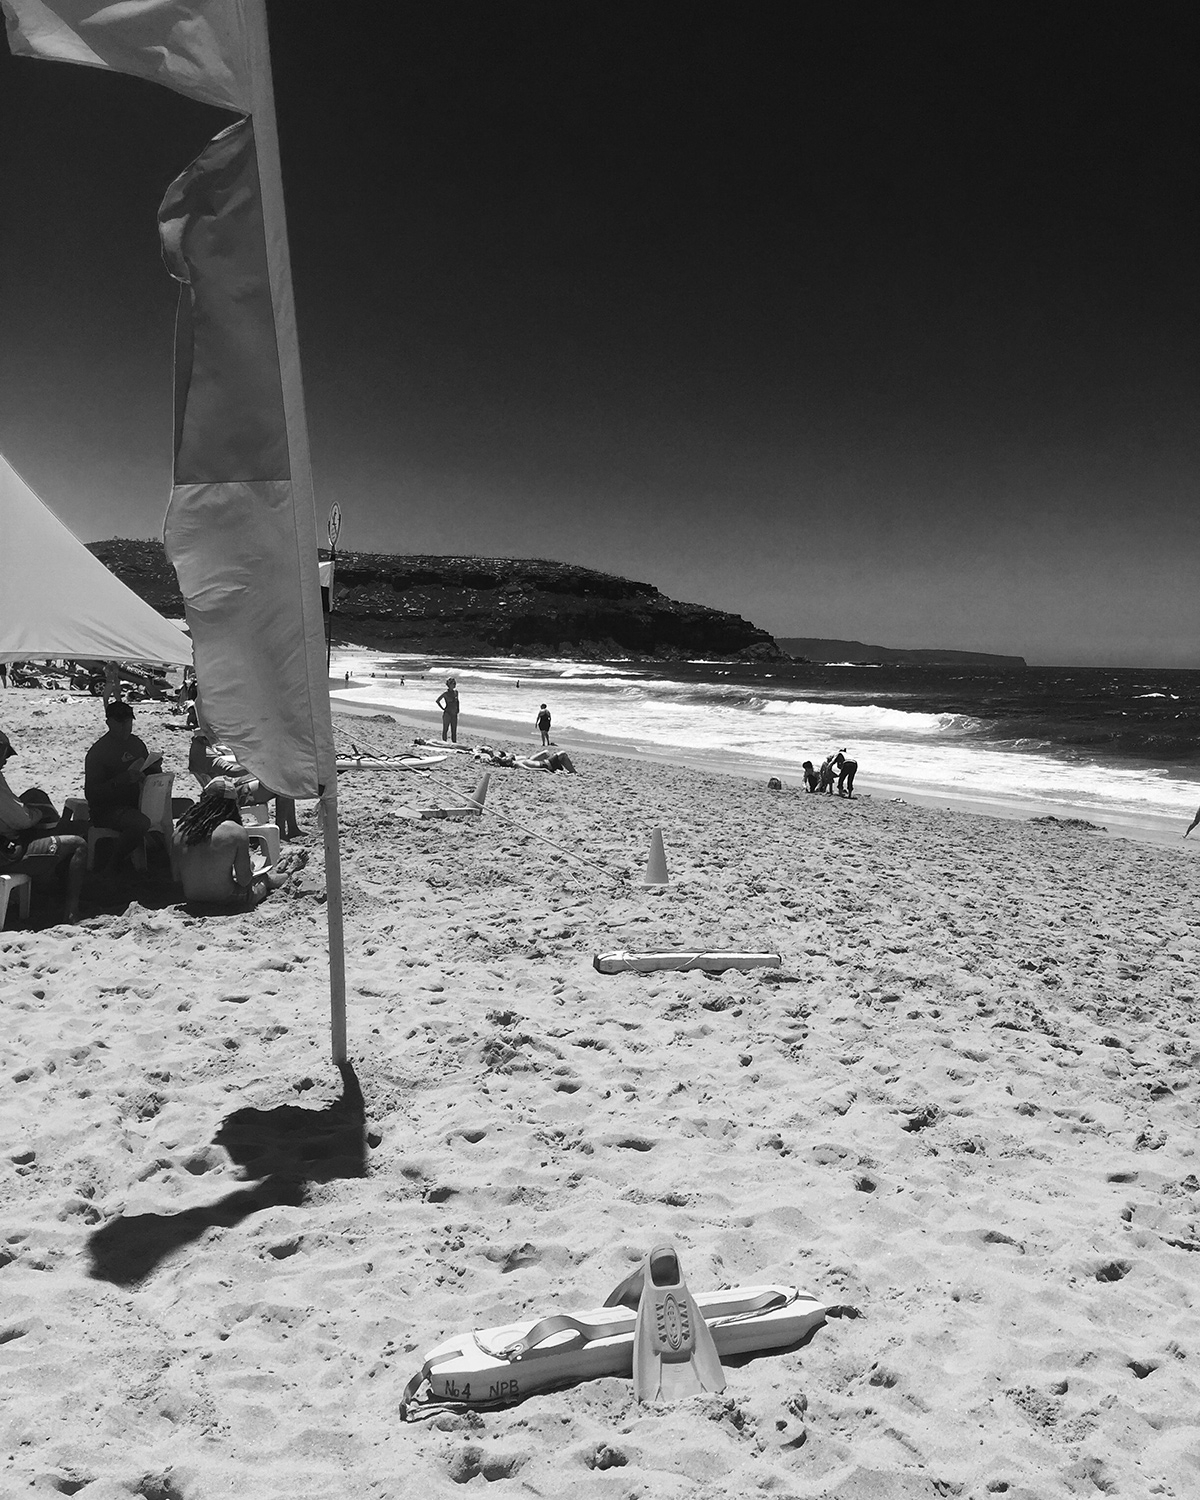 A black and white image of the Surf Lifesaving flags and groups of people sitting along the beach 